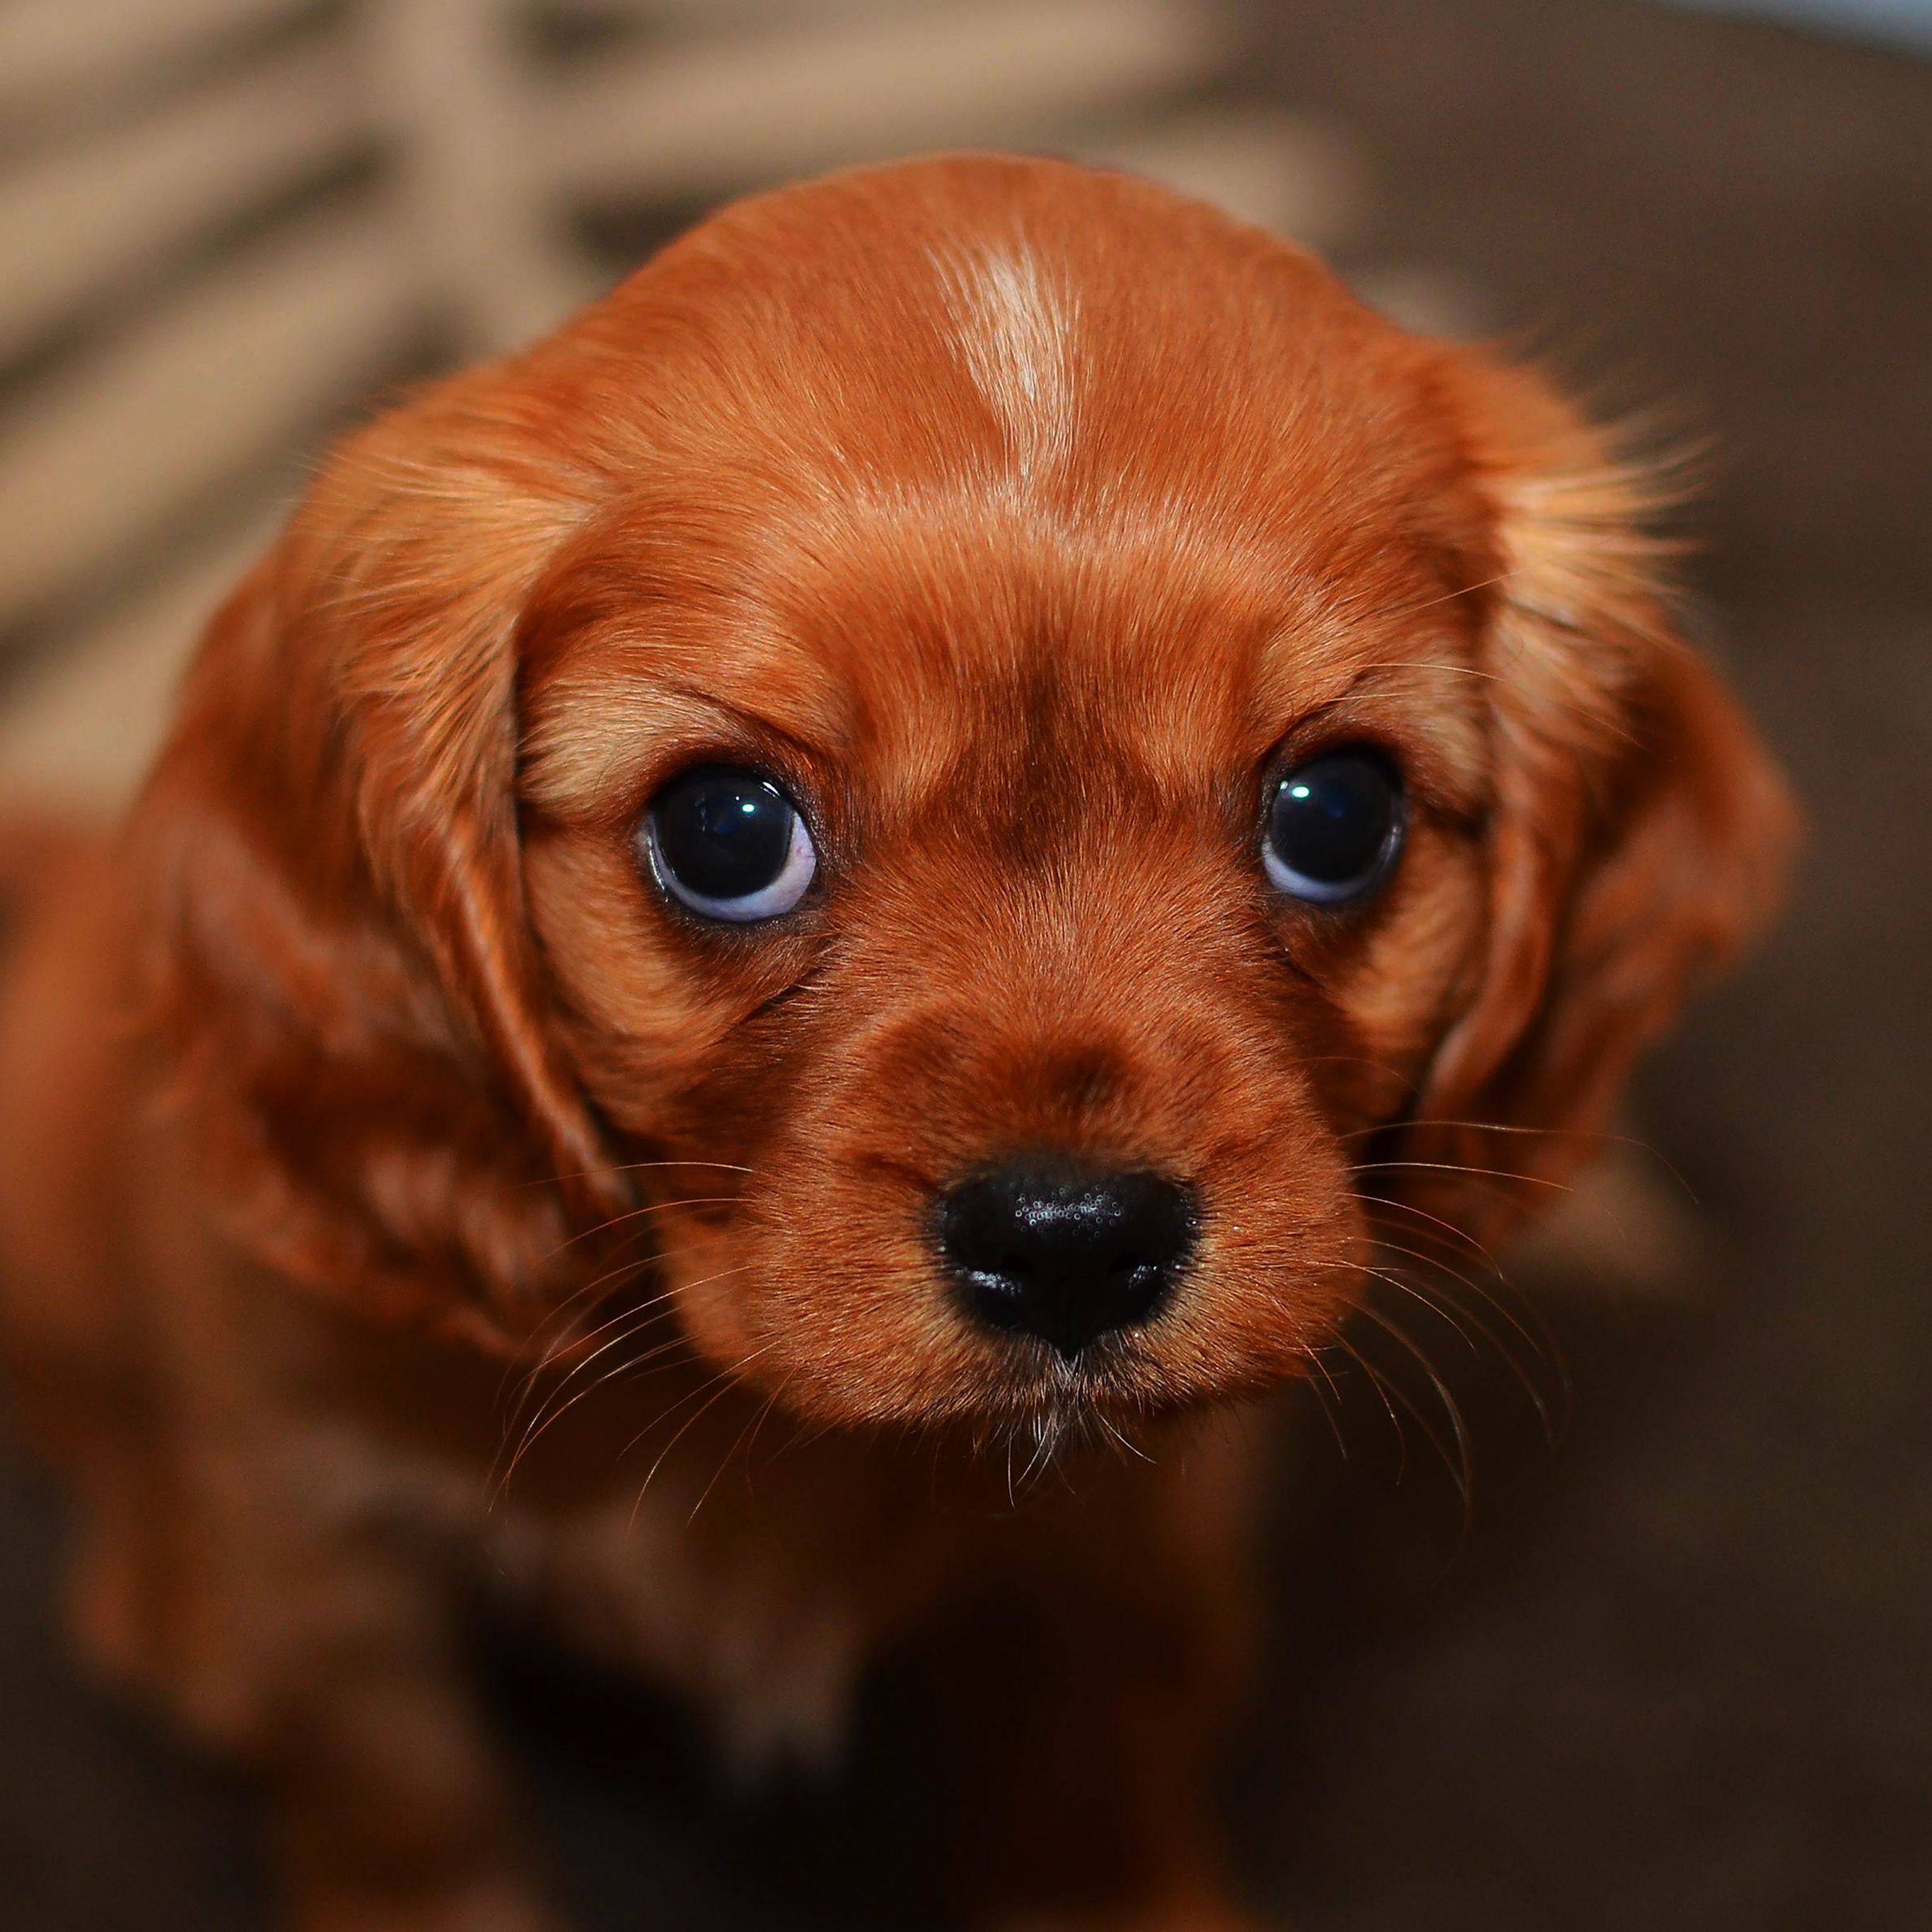 Android wallpaper. cute puppy wallpaper